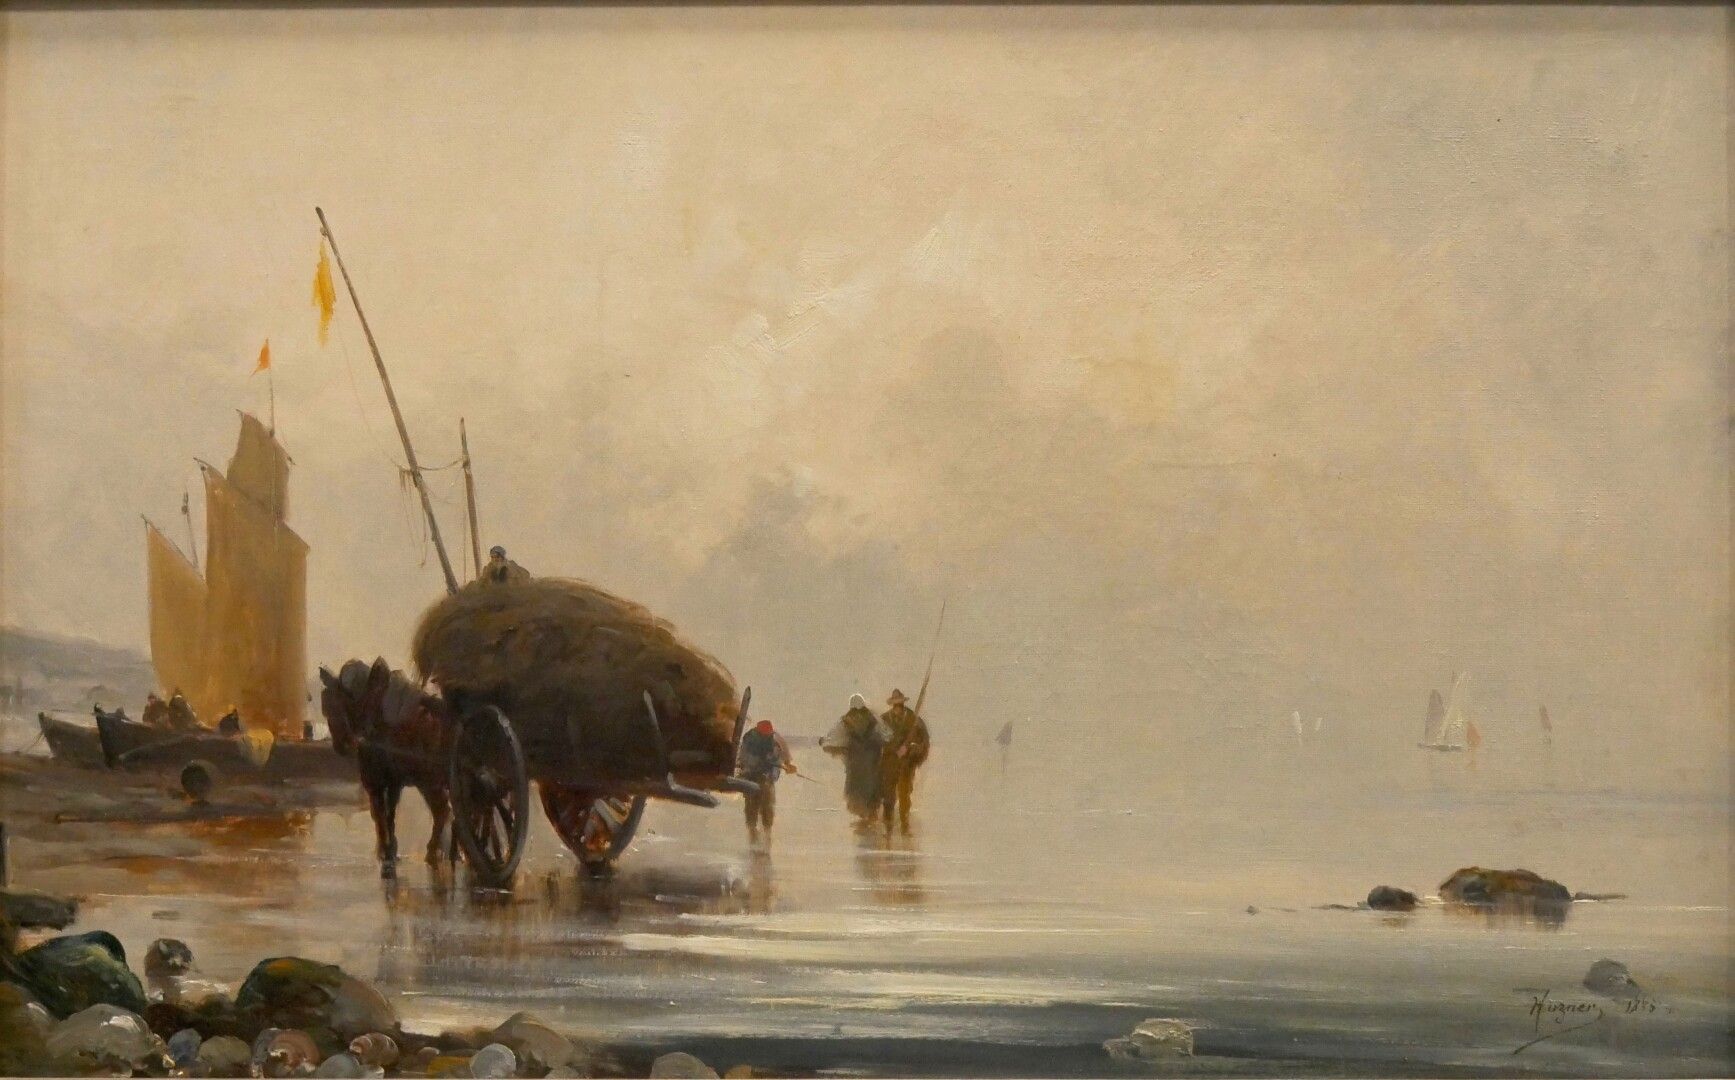 Null HUZNER (19th - 20th CENTURY)

The seaweed collectors 

Oil on canvas

Signe&hellip;